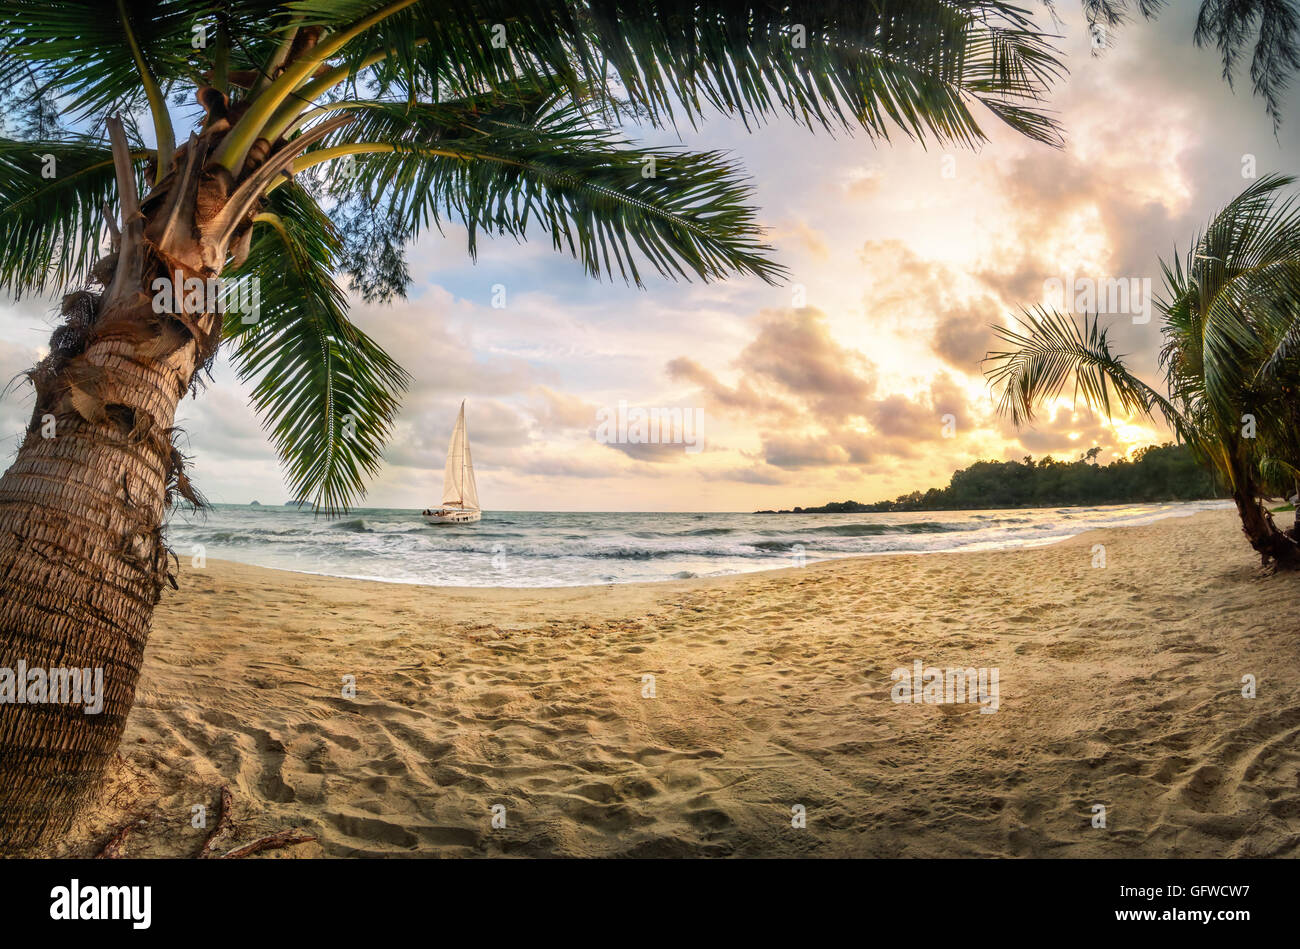 Tropical beach paradise at sunset, with warm-colored sand, palm trees, beautiful clouds and a sailing boat Stock Photo